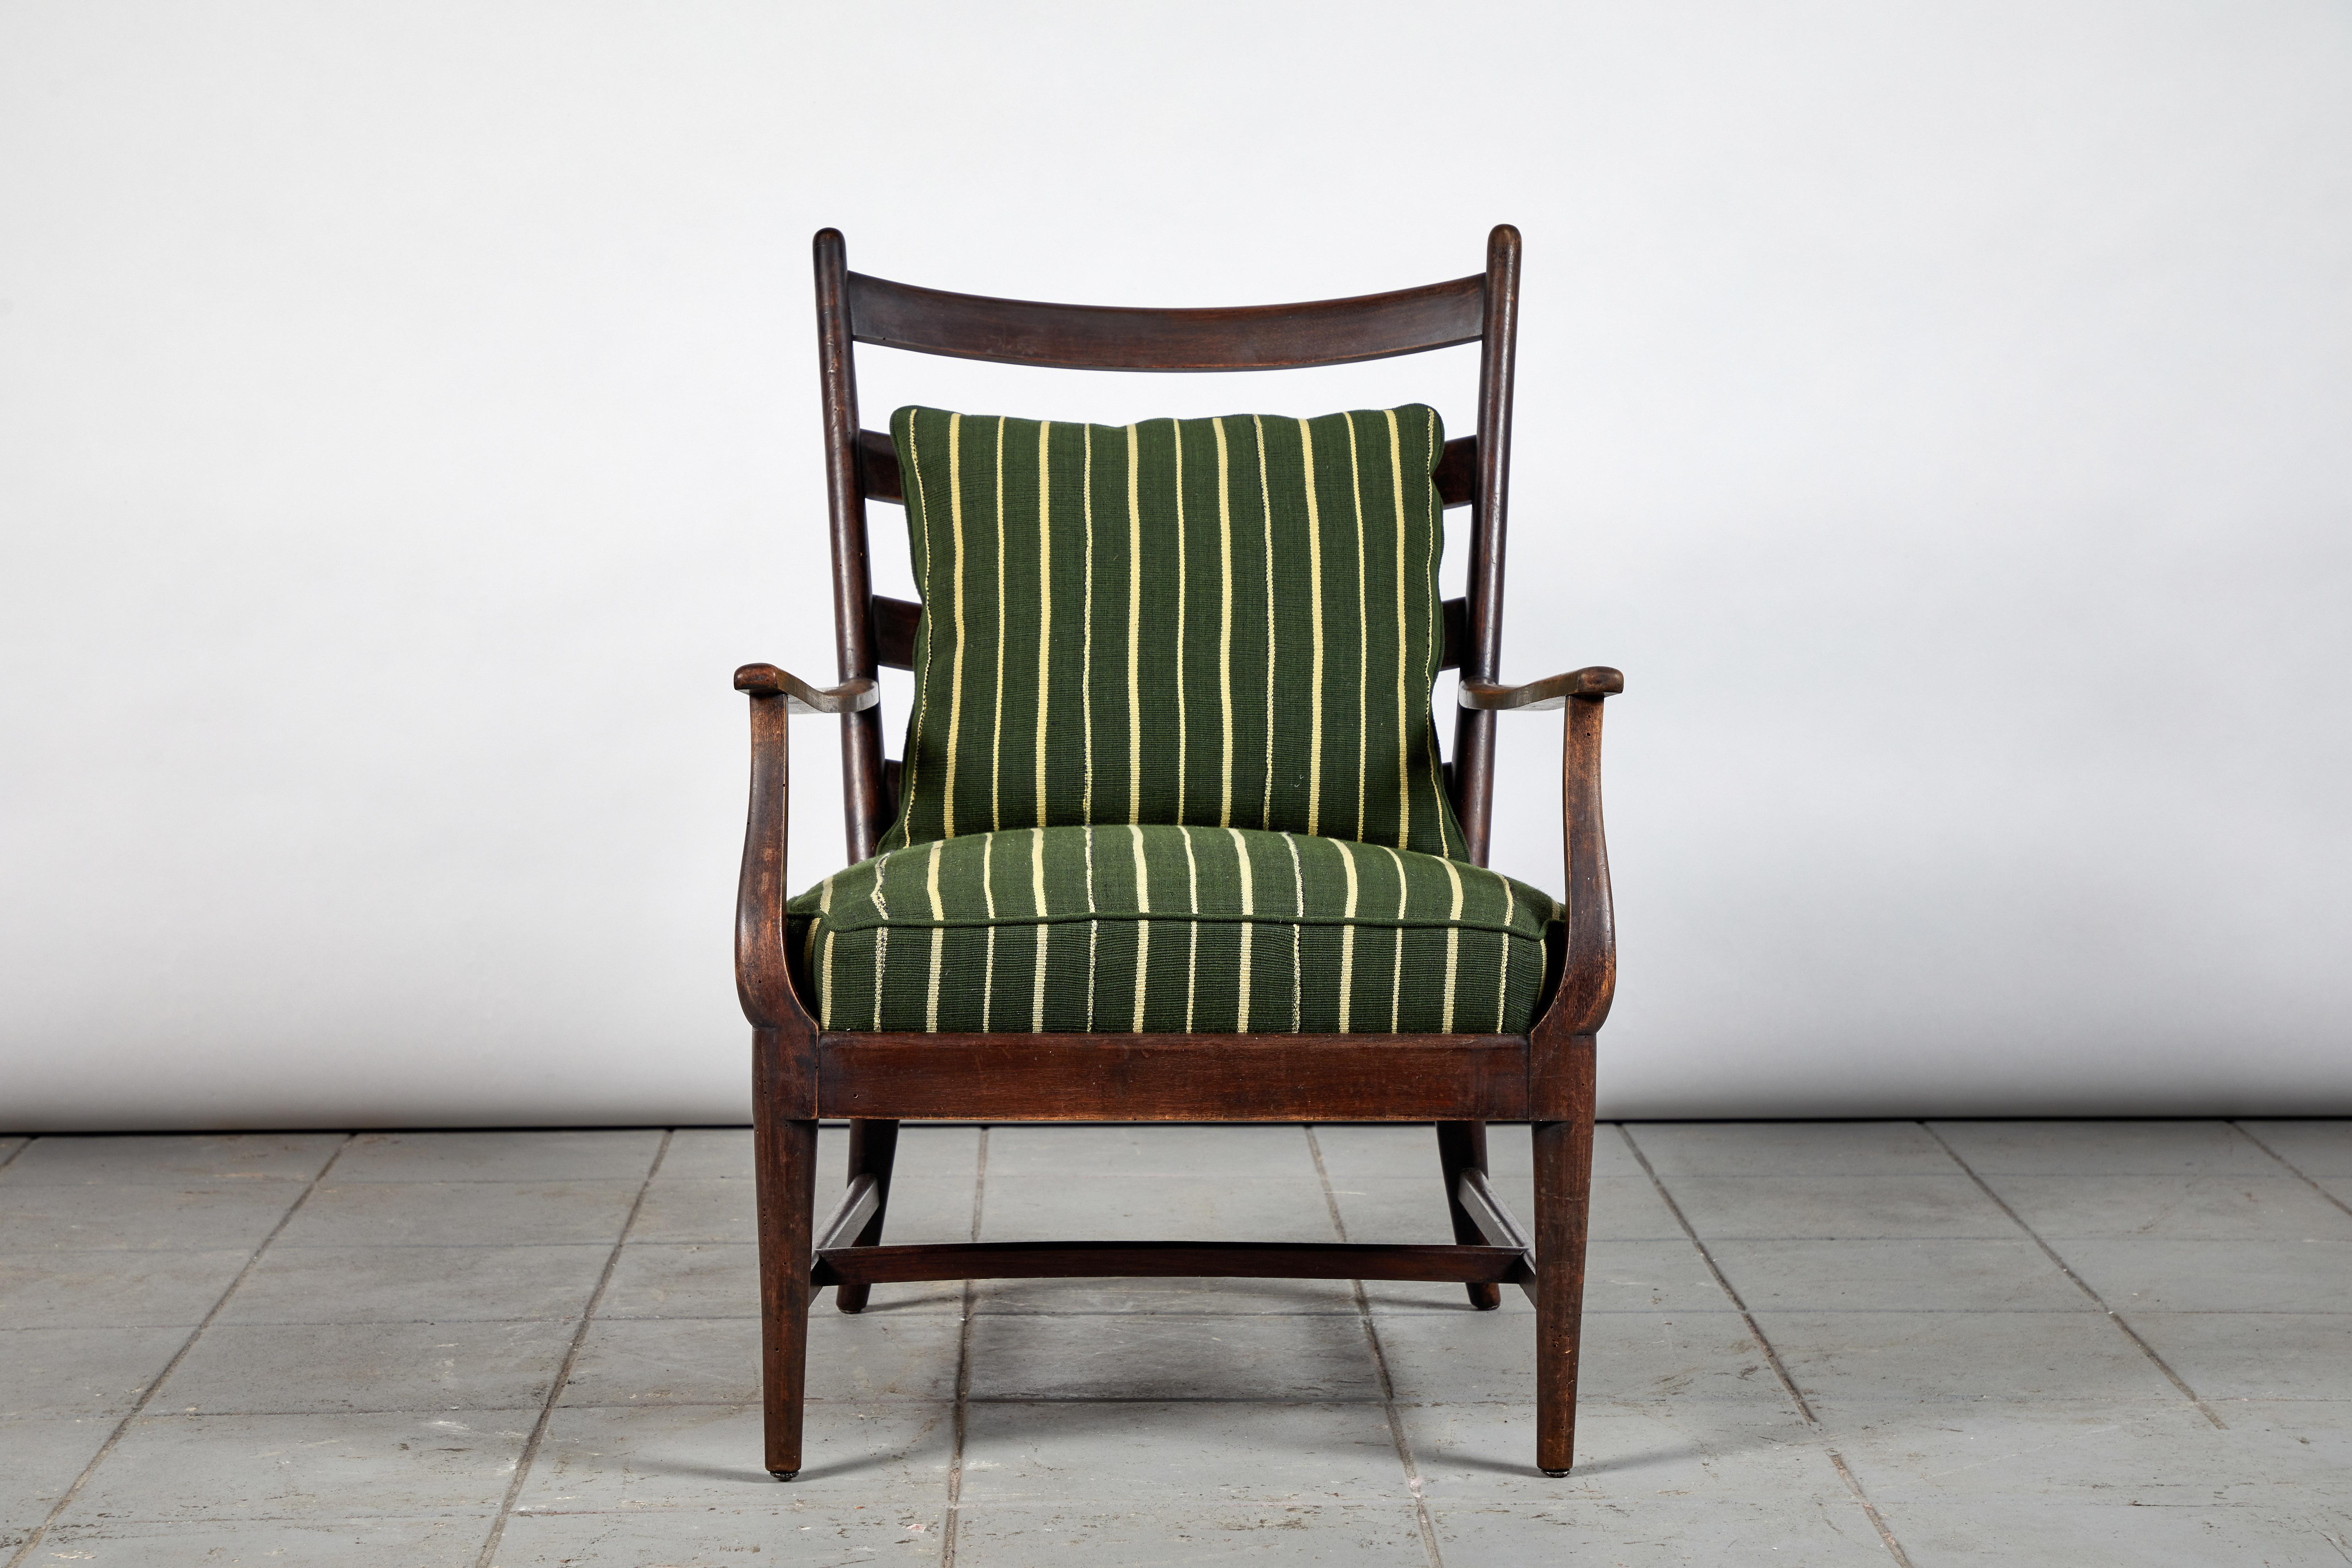 French ladder back armchair upholstered in green and natural striped African fabric.